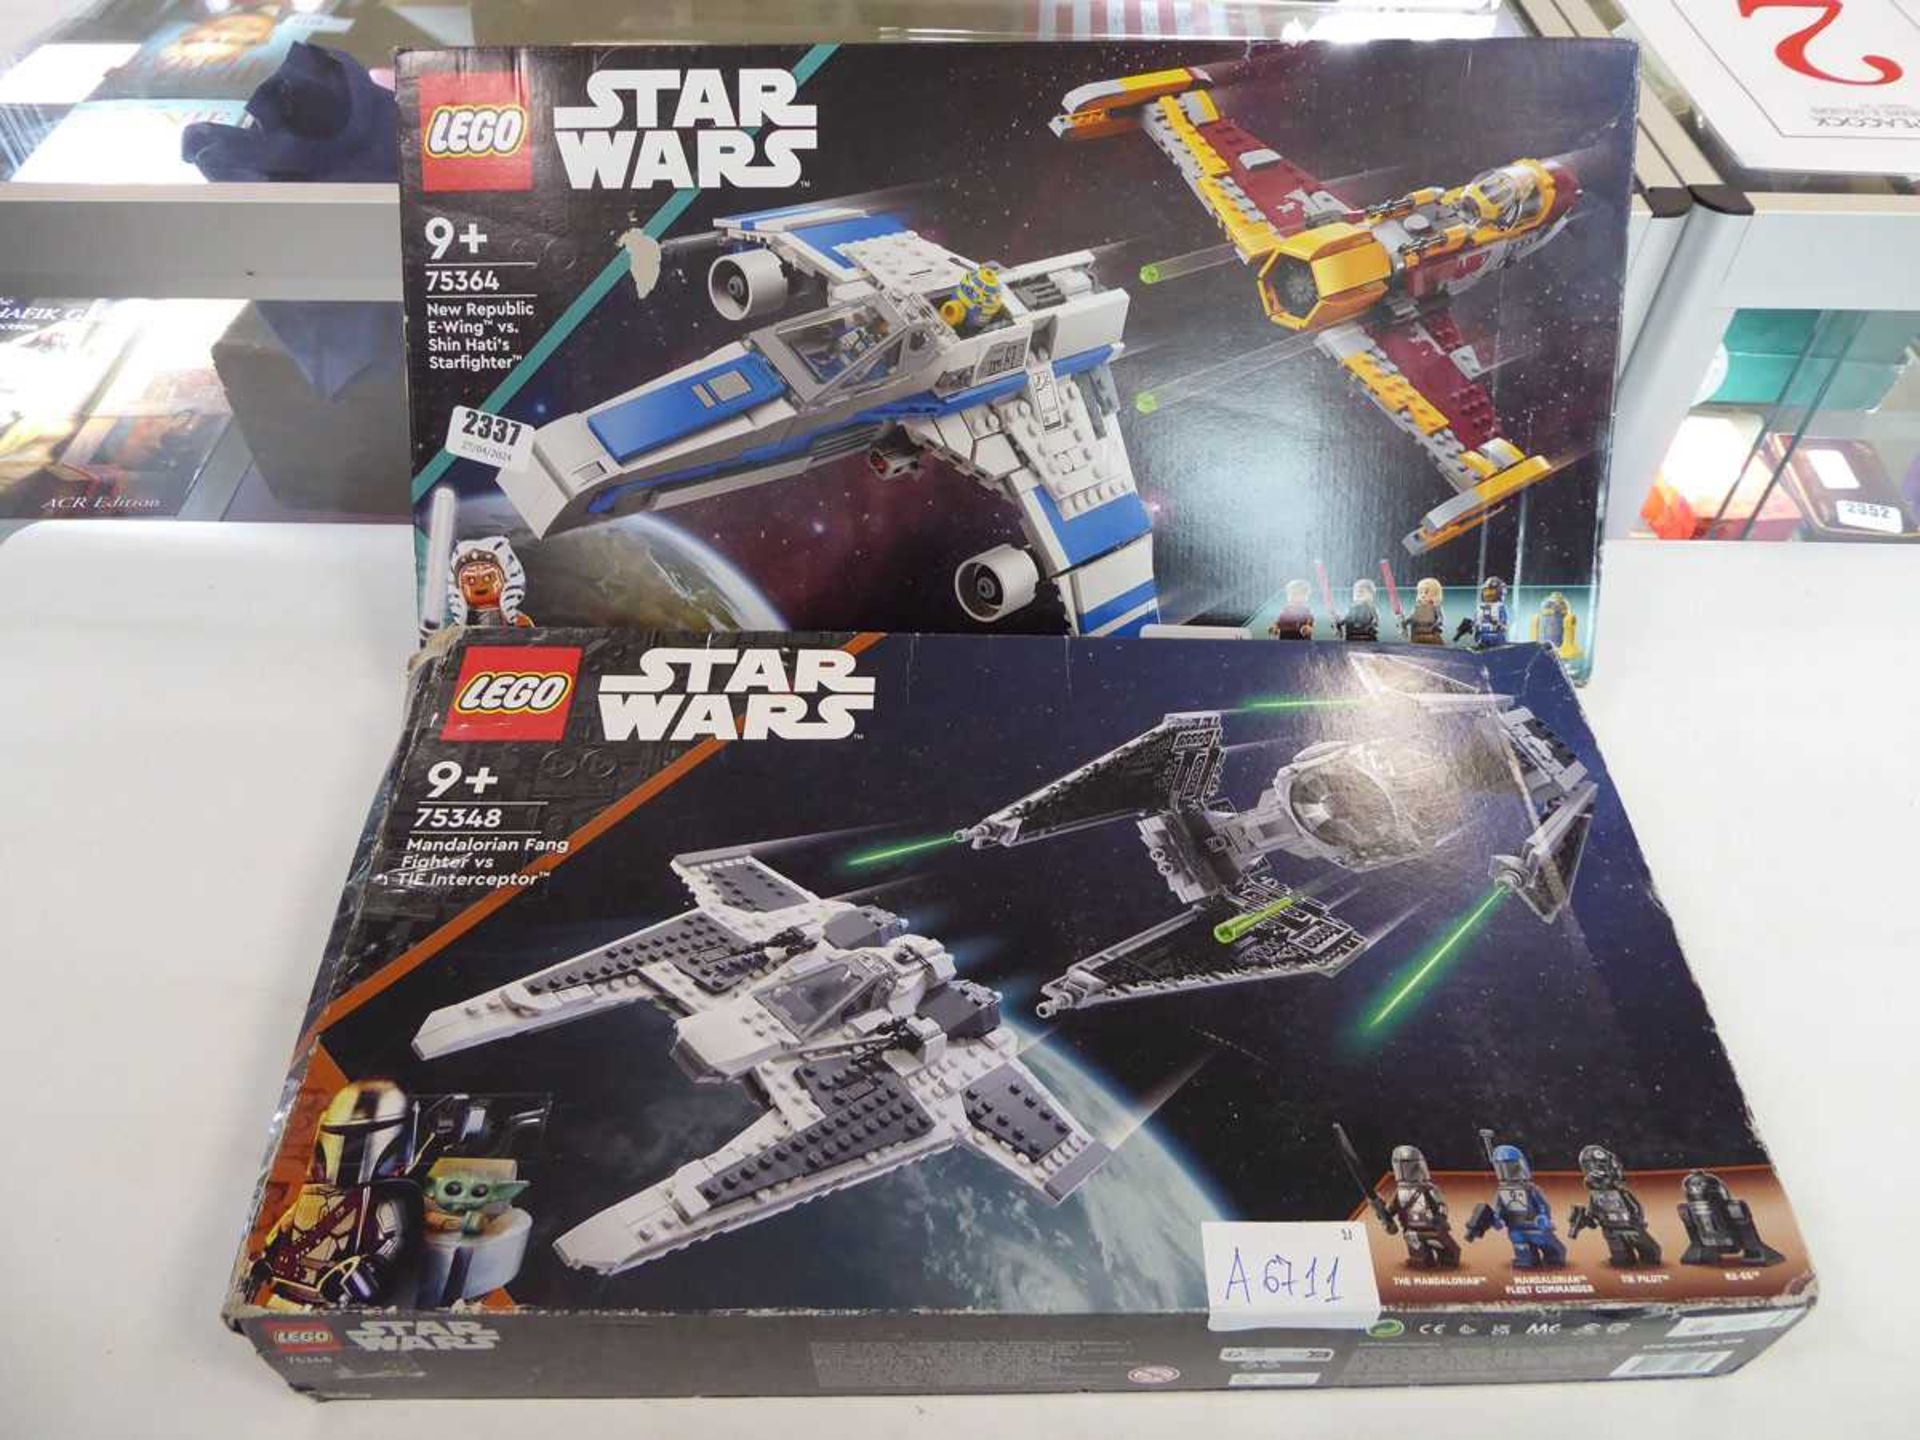 +VAT 2 LEGO Star Wars sets to include LEGO 75364 and LEGO 75348 All LEGO is unchecked. No